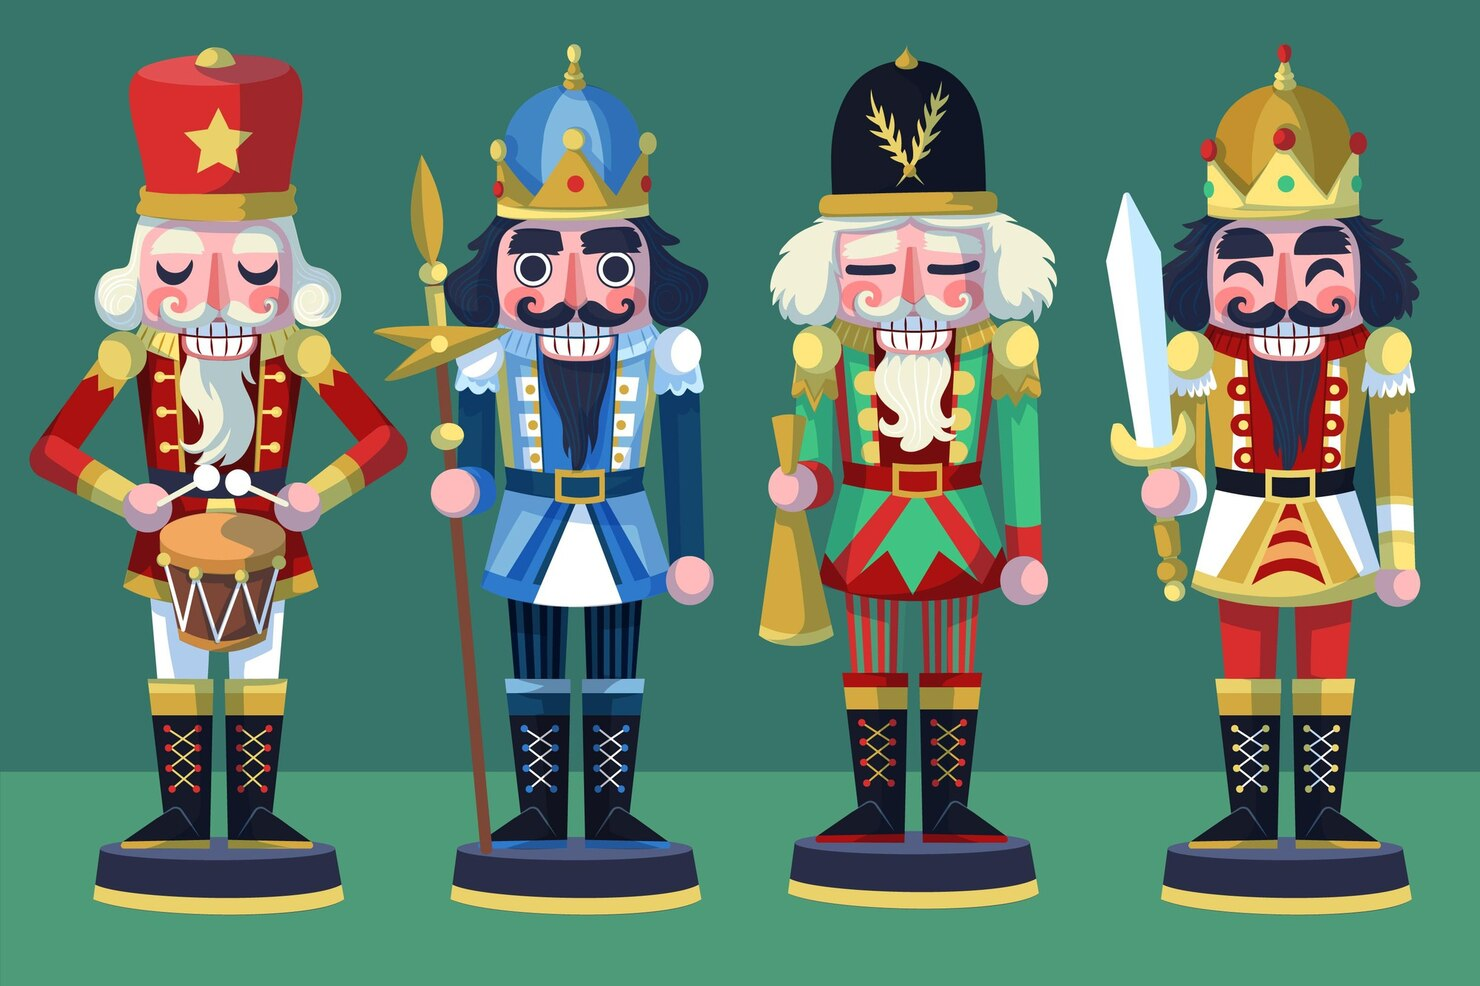 A collection of four laughing Nutcrackers.